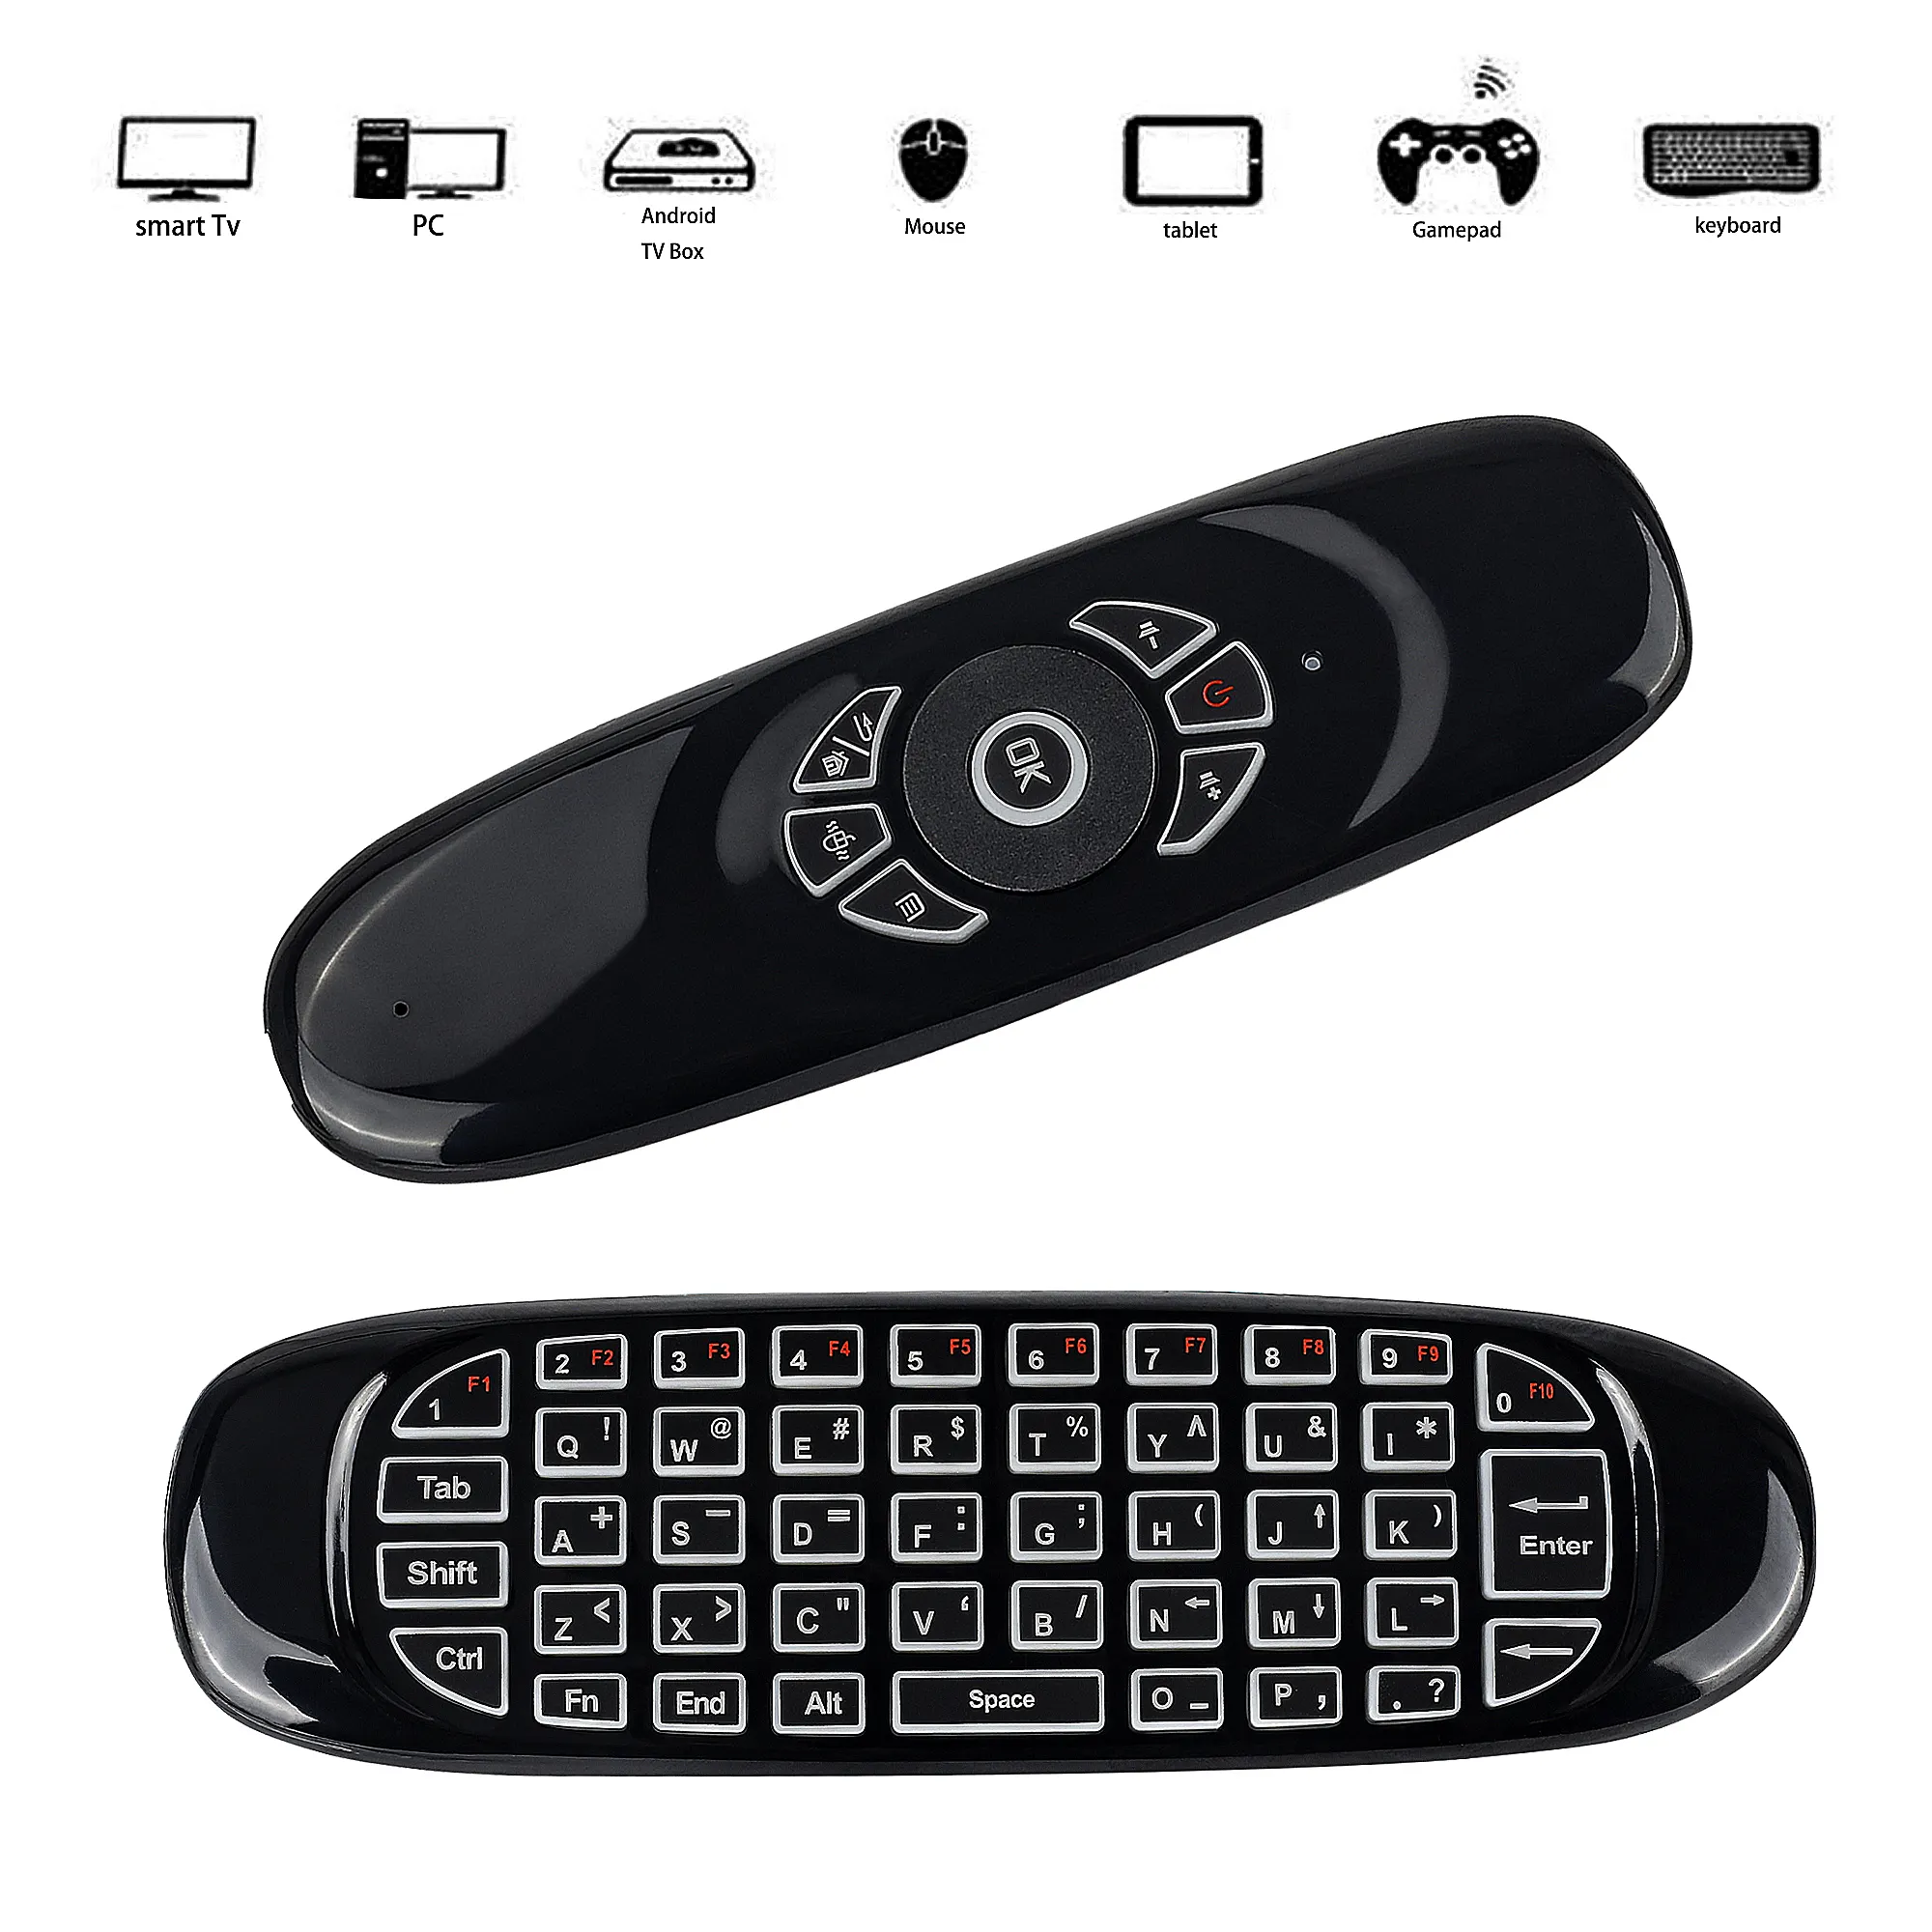 For 6 Axis Gyroscope C120 2.4GHz Wireless Keyboard Fly Air Wireless Mouse With Remote Control Smart TV Mini PC With Backlight